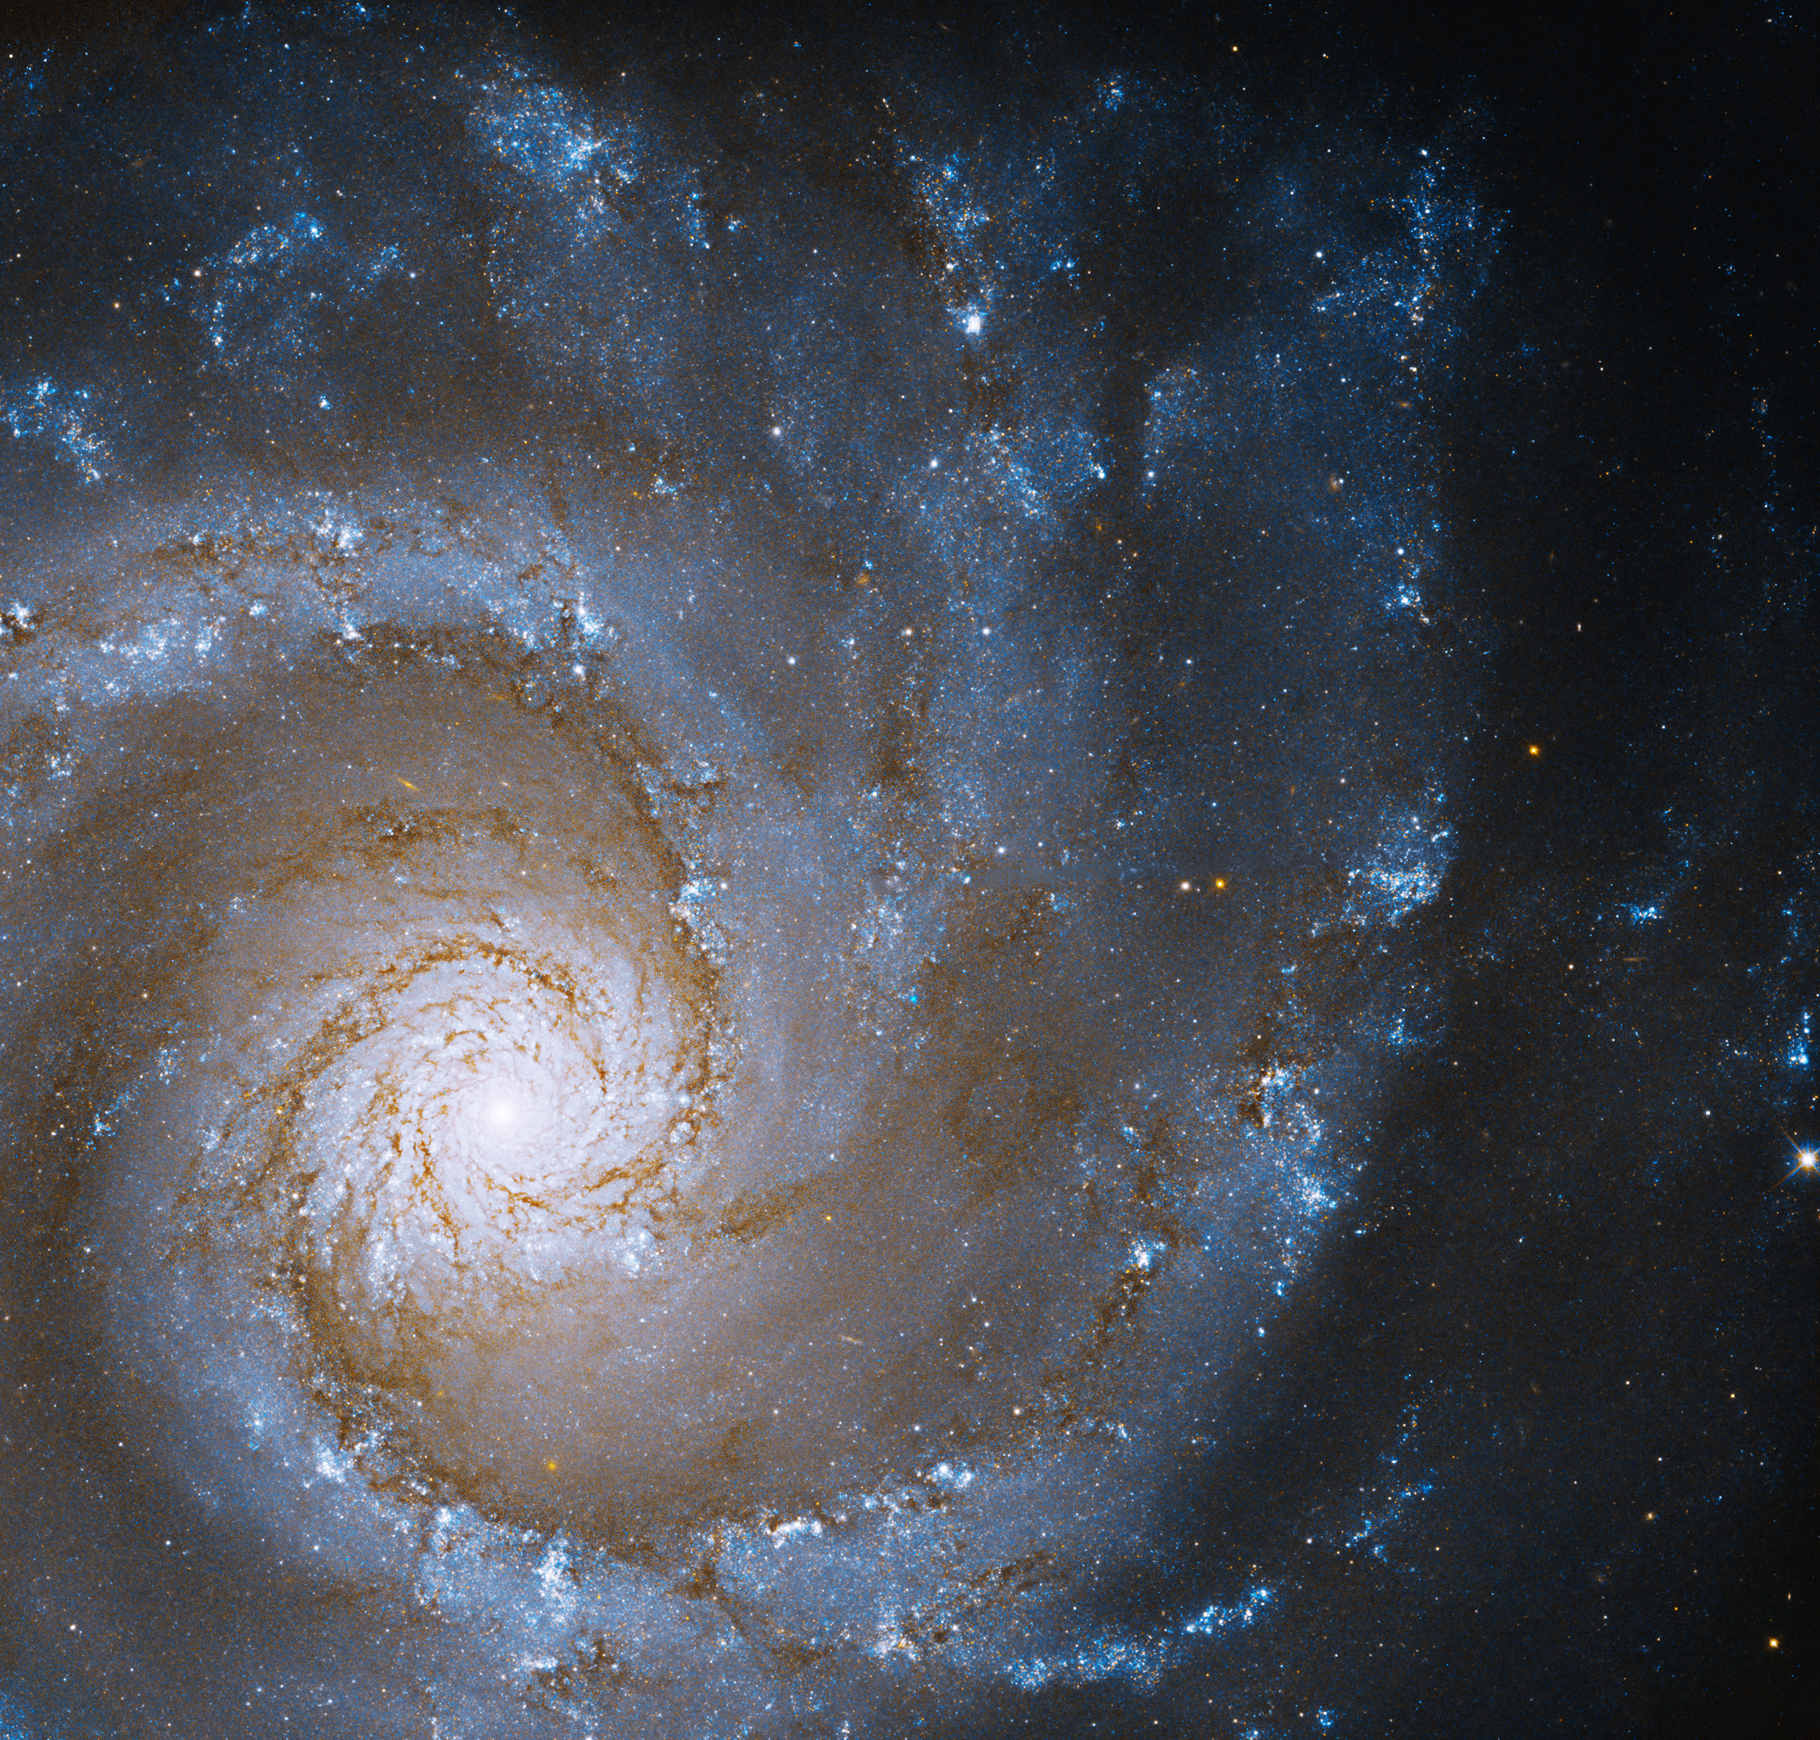 Spiral galaxy filled with stars.